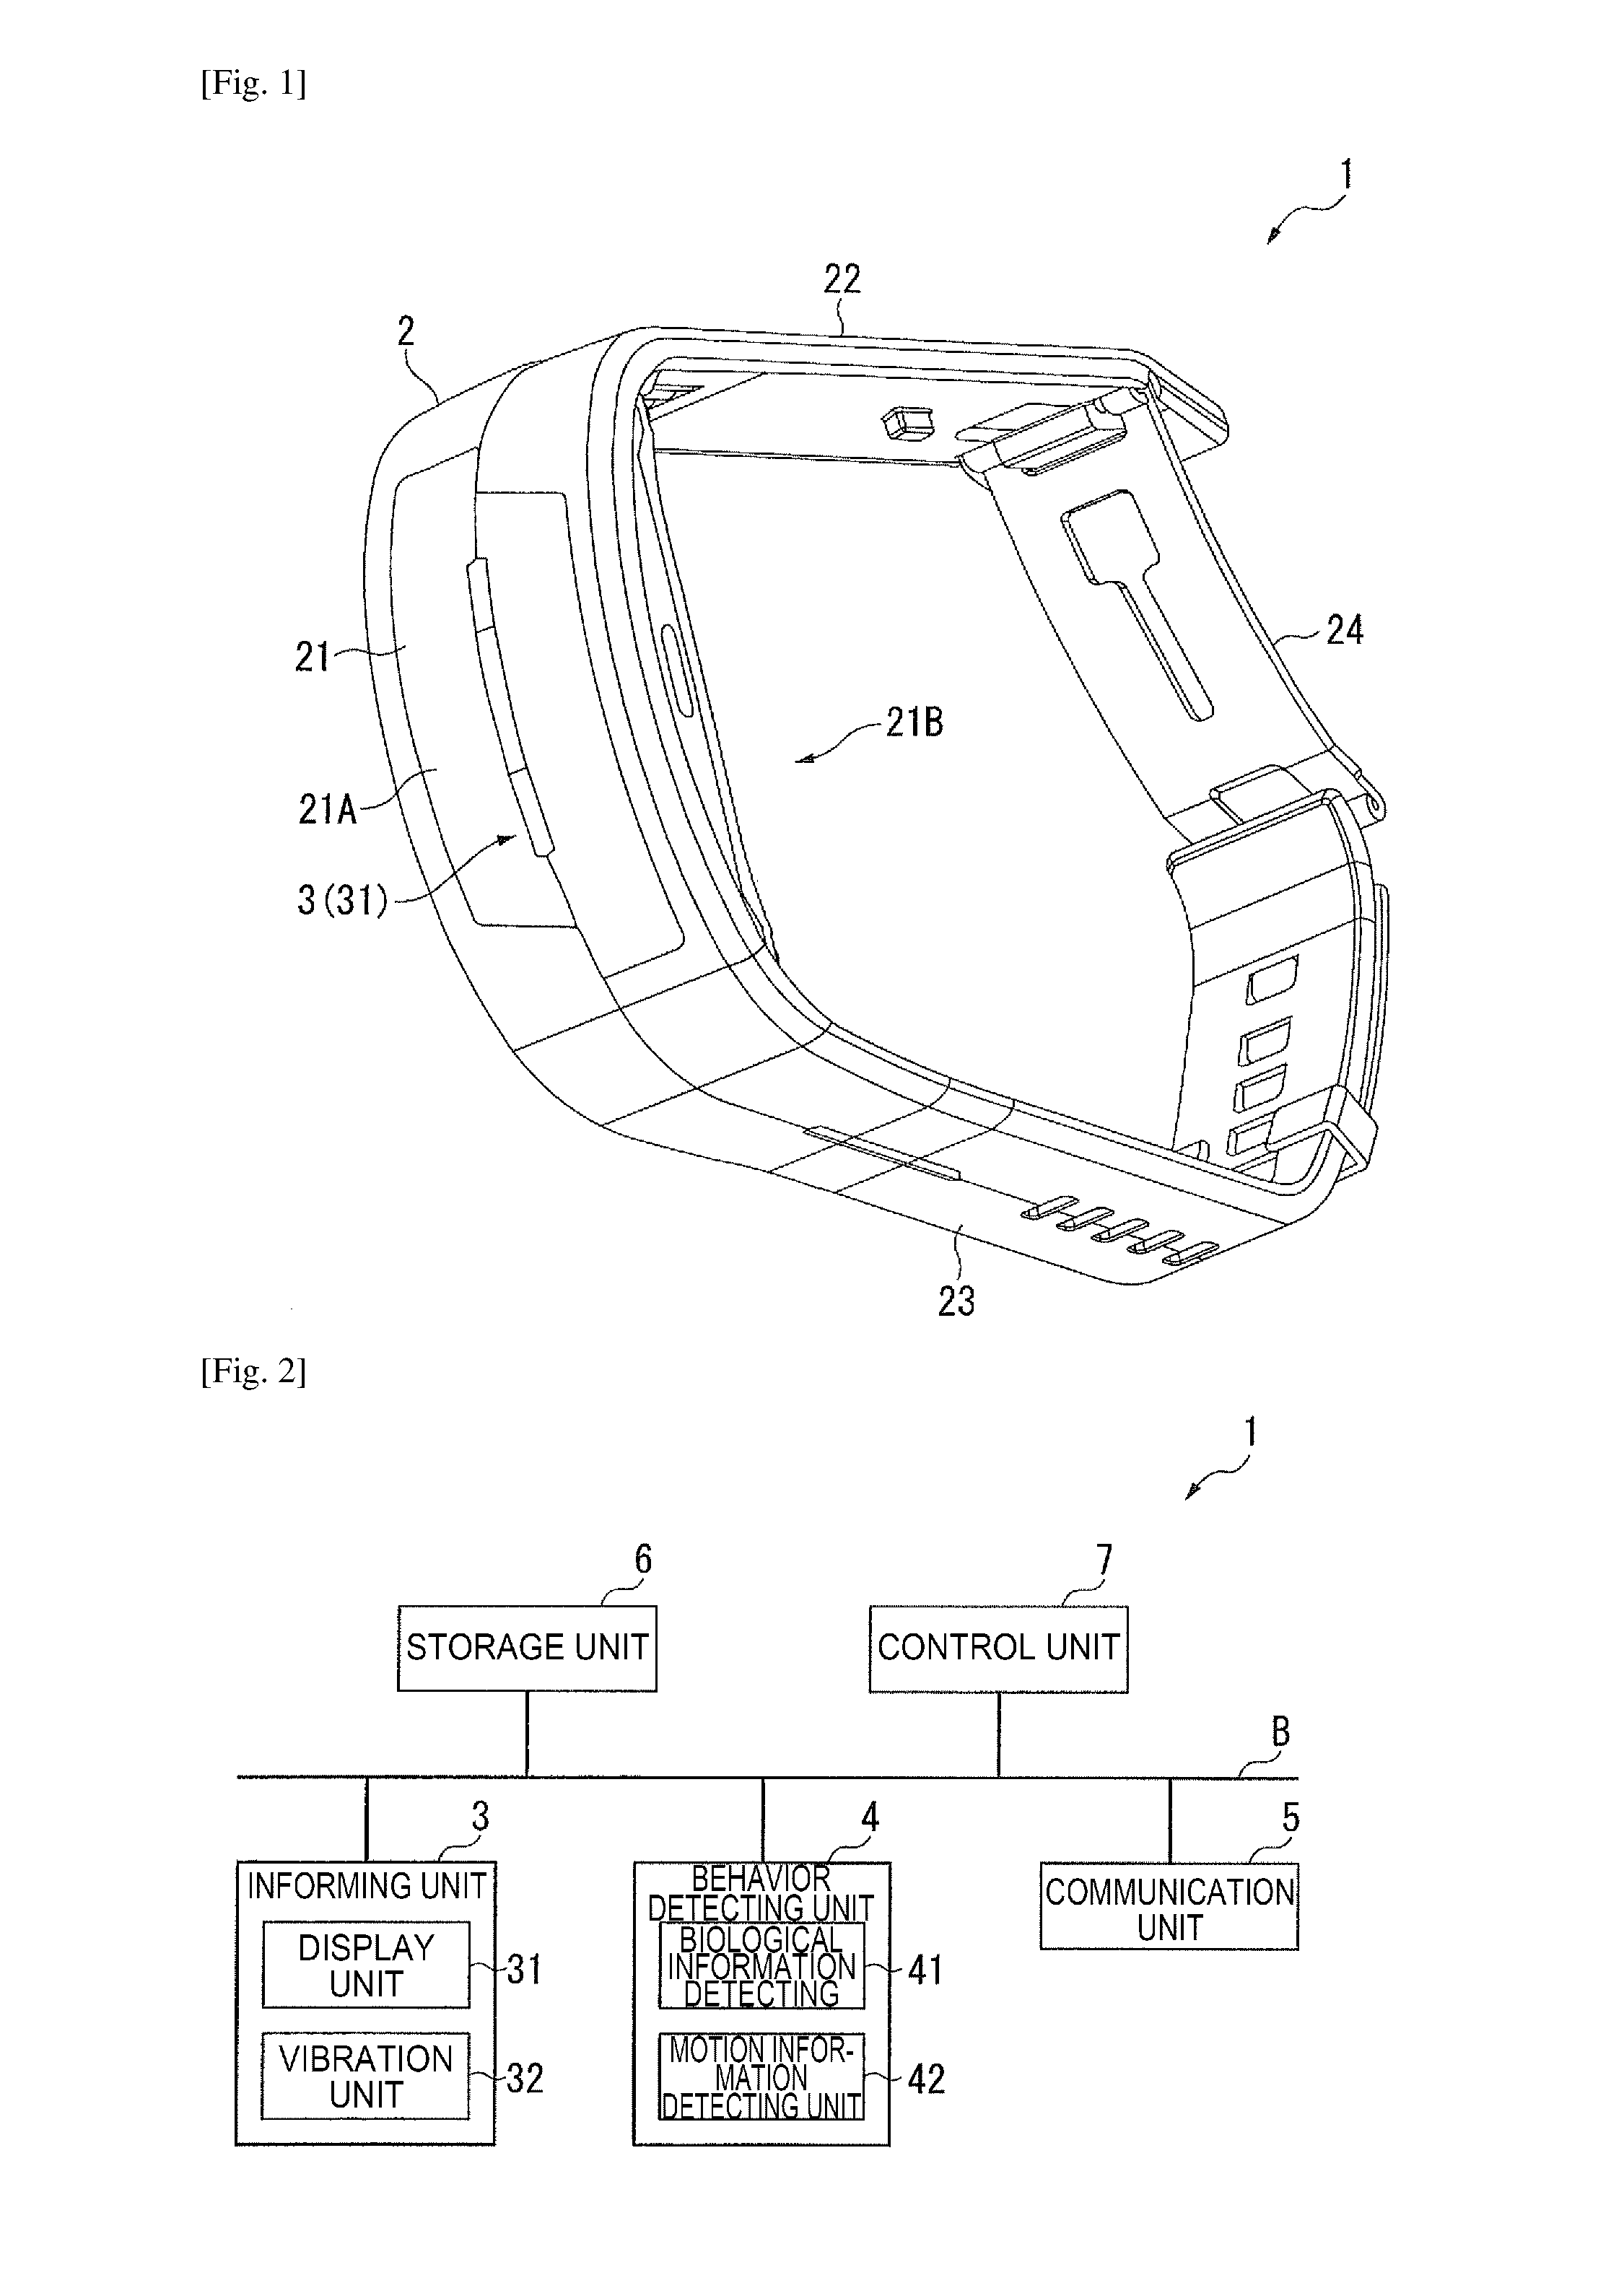 Biological information measuring device and method of controlling biological information measuring device